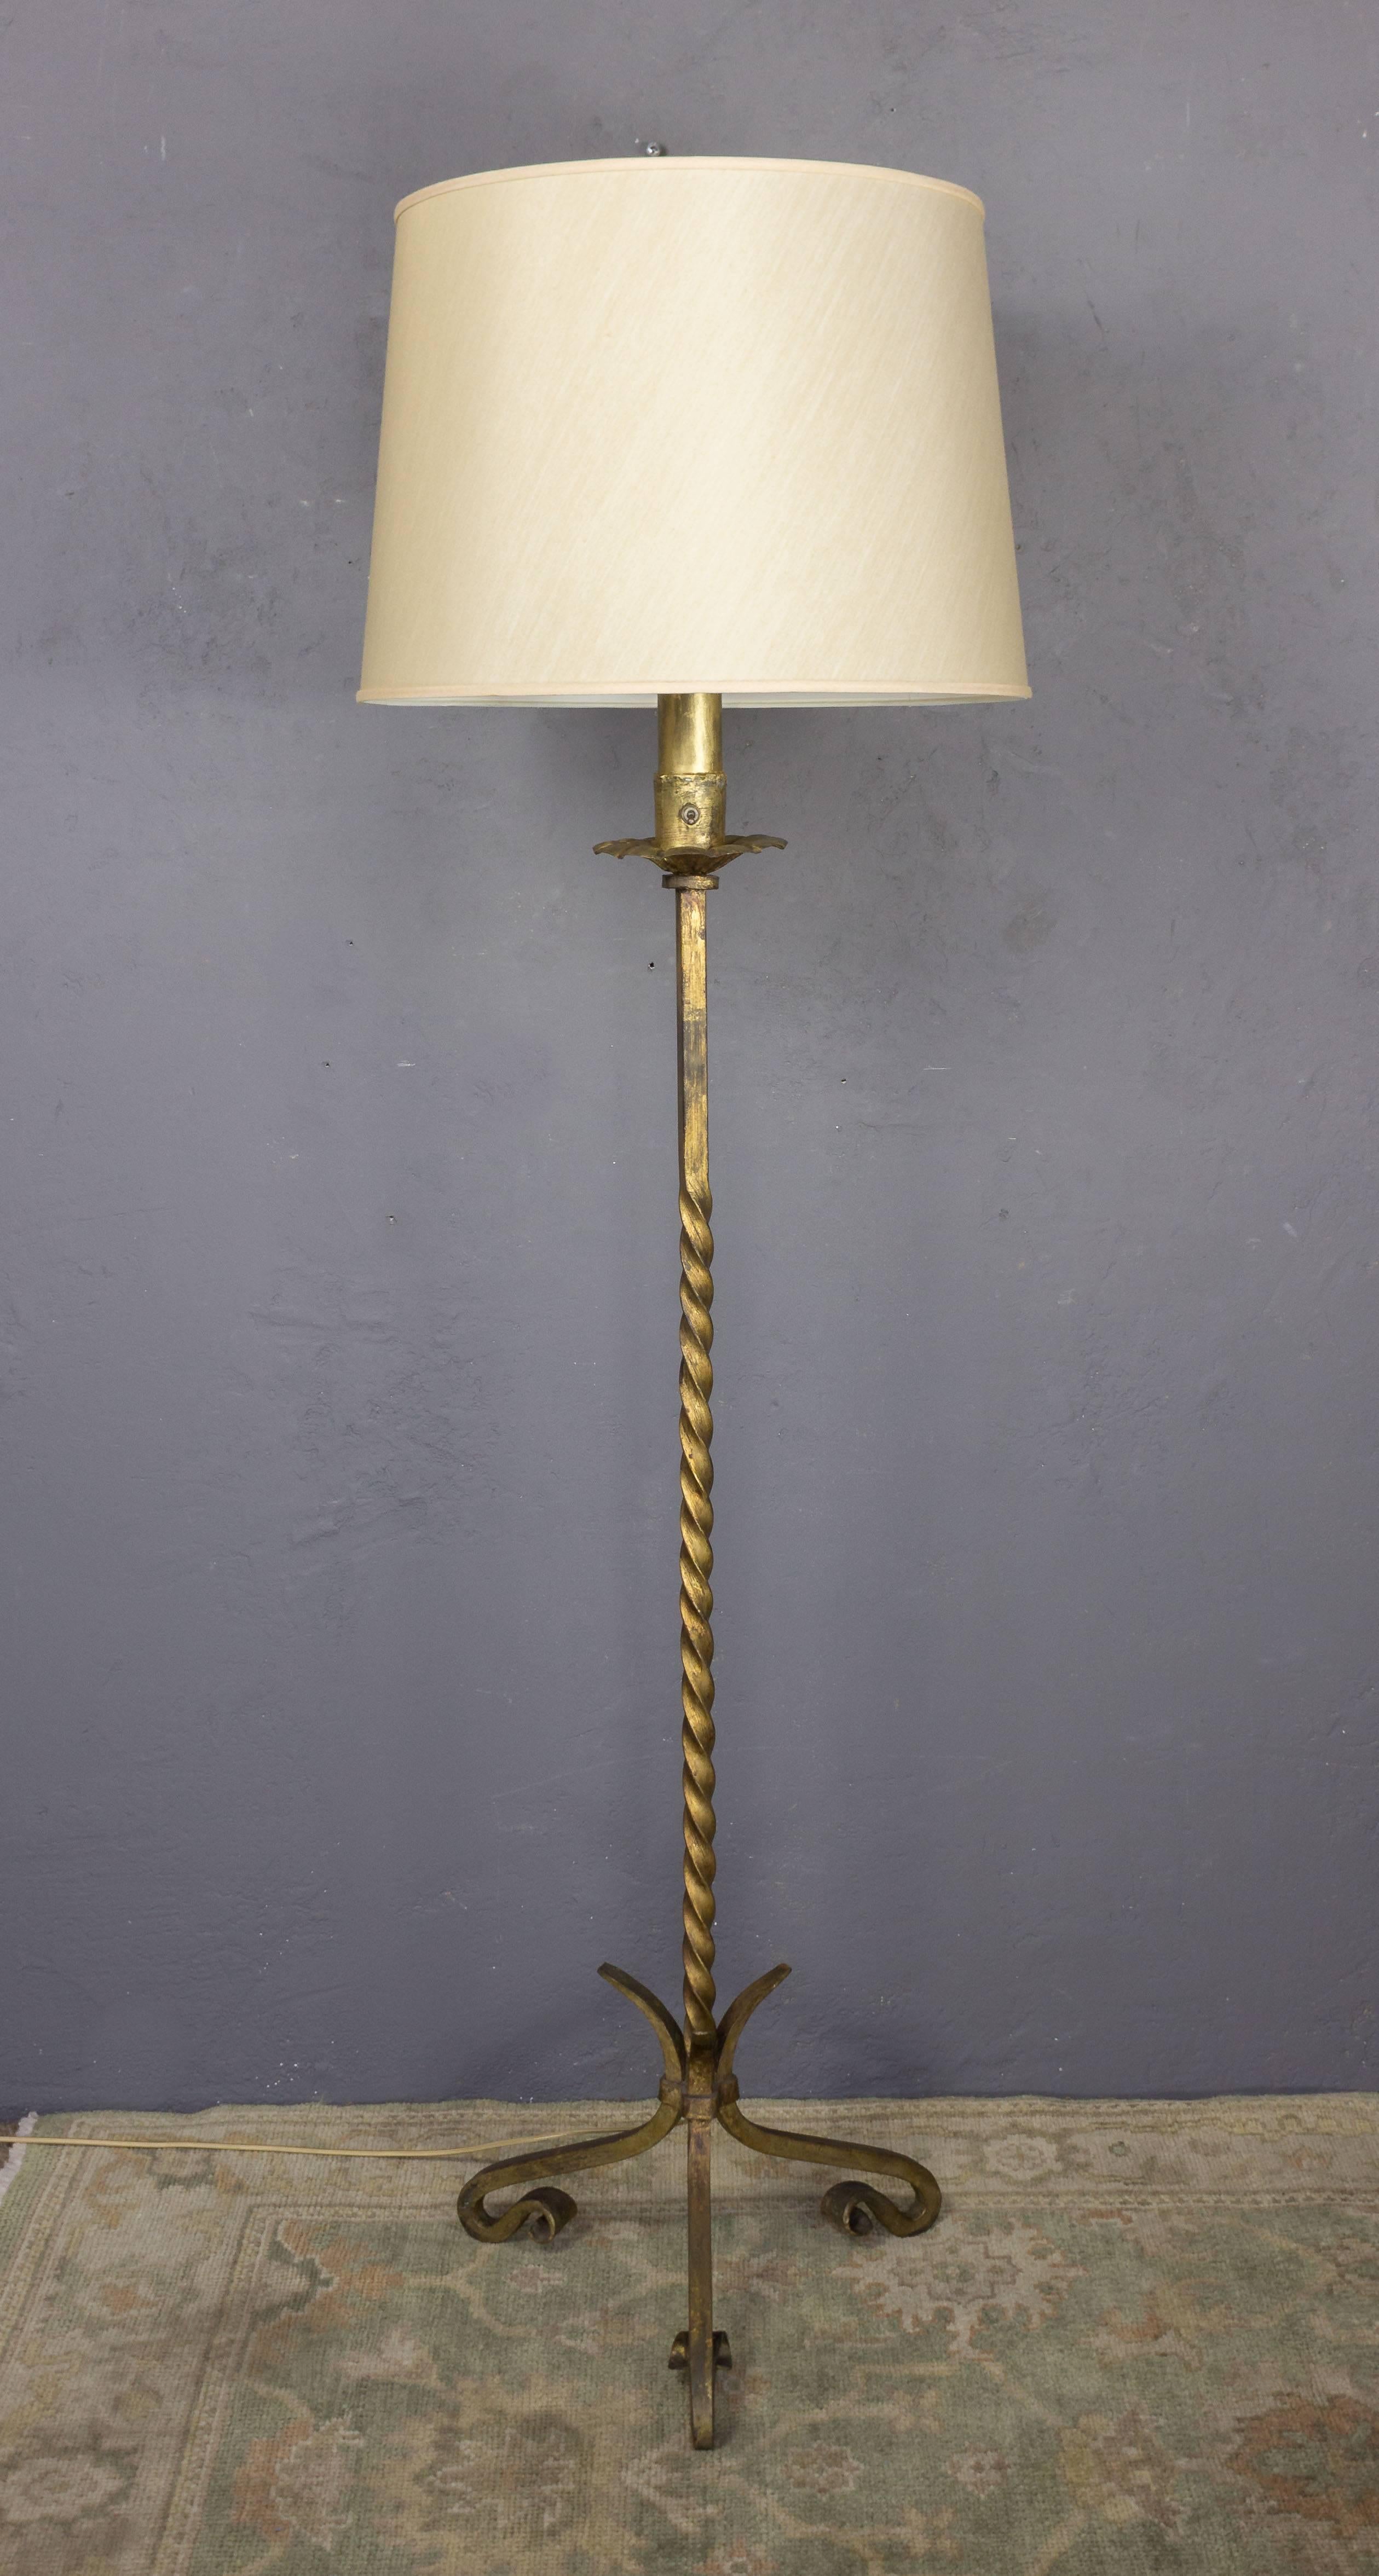 Pair of Spanish gilt iron floor lamps with a twisted stem and a tripod base with inverted and curved feet. Not sold with shades, circa 1940s.